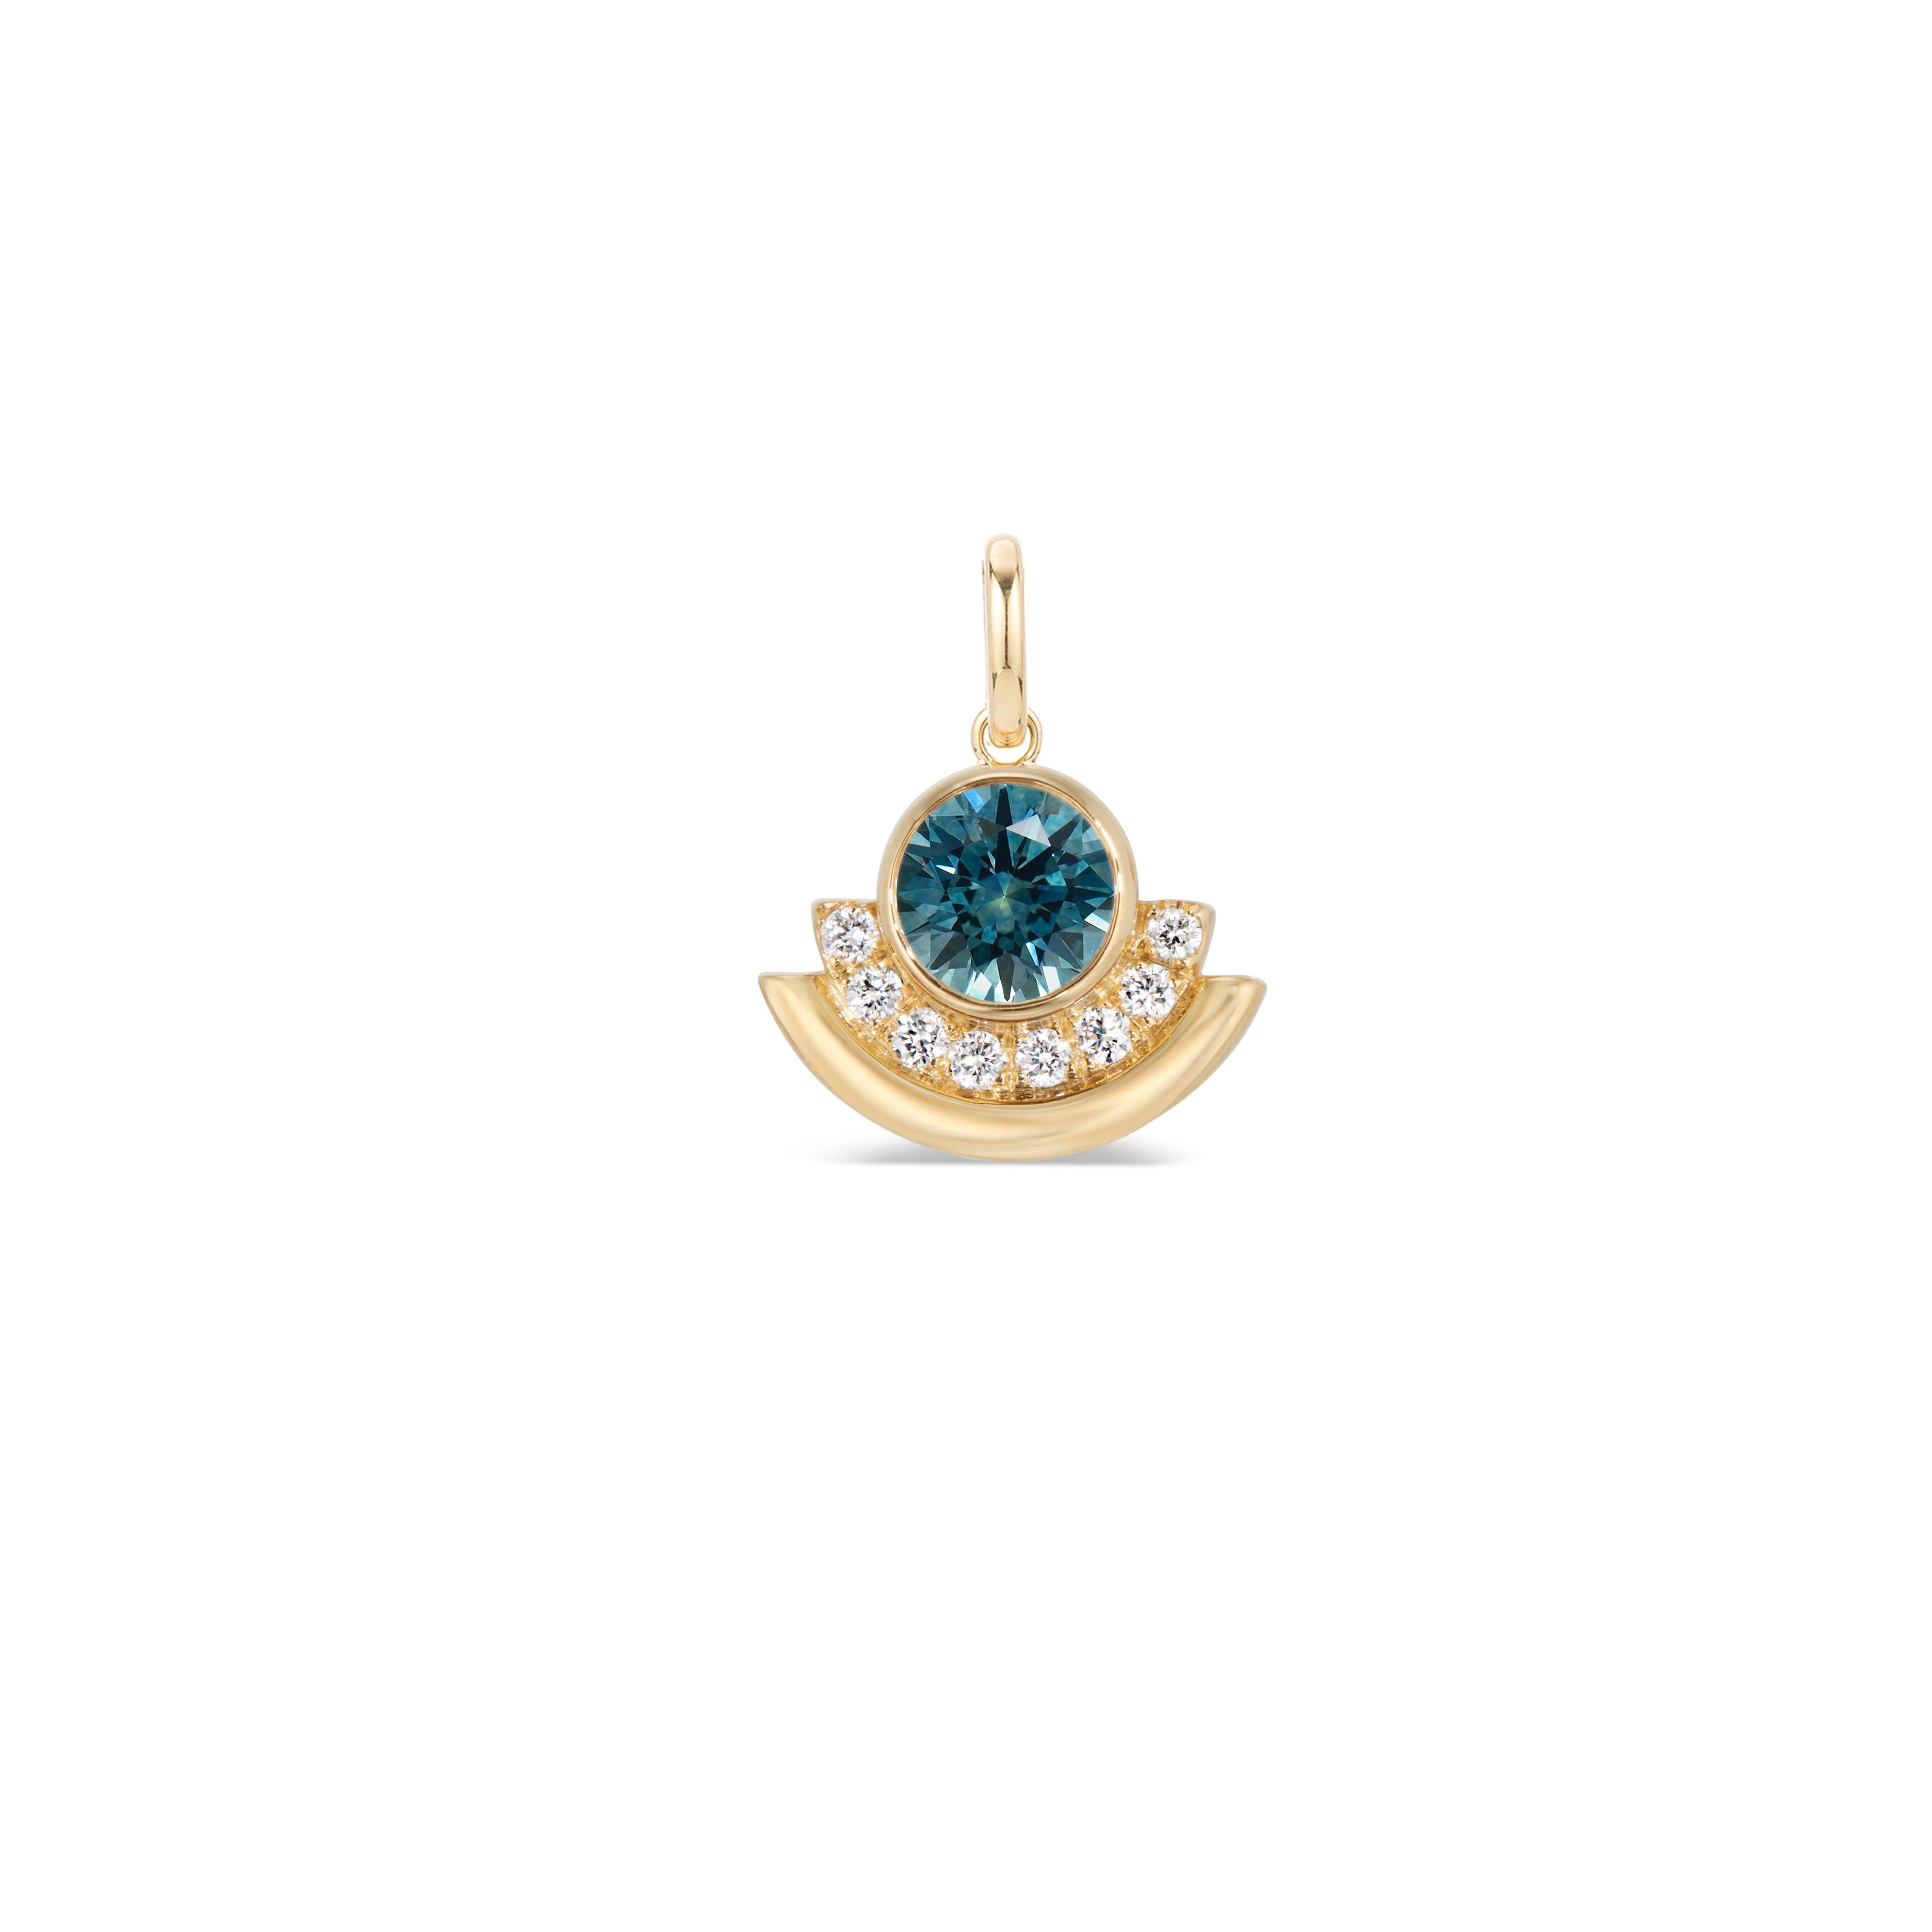 This architectural yet minimal arc shaped 14K gold charm is ready to slip onto your favorite chain. It features a large bezel set teal montana sapphire accented with modern banded detail and diamond pave. Its petite size makes it suitable for